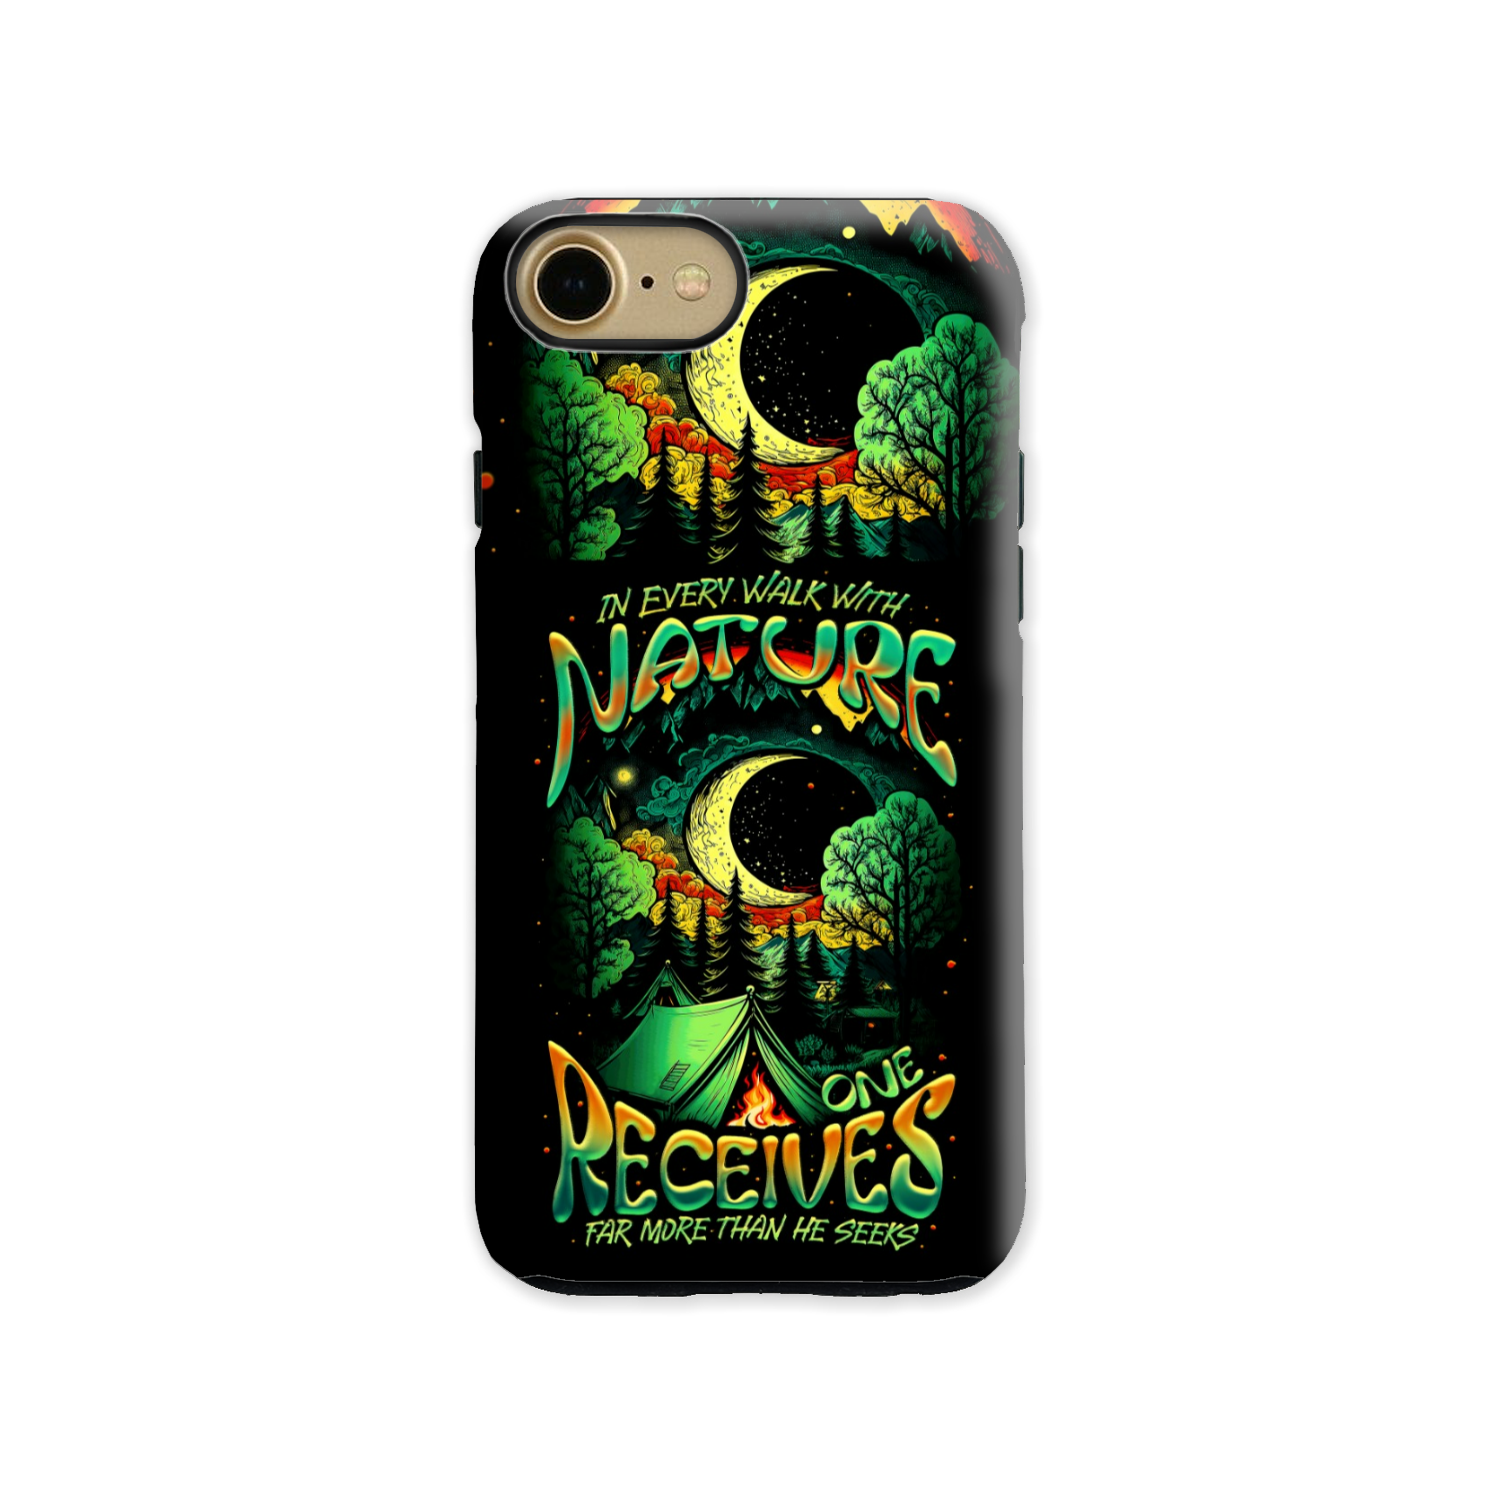 IN EVERY WALK WITH NATURE PHONE CASE - TY2804232